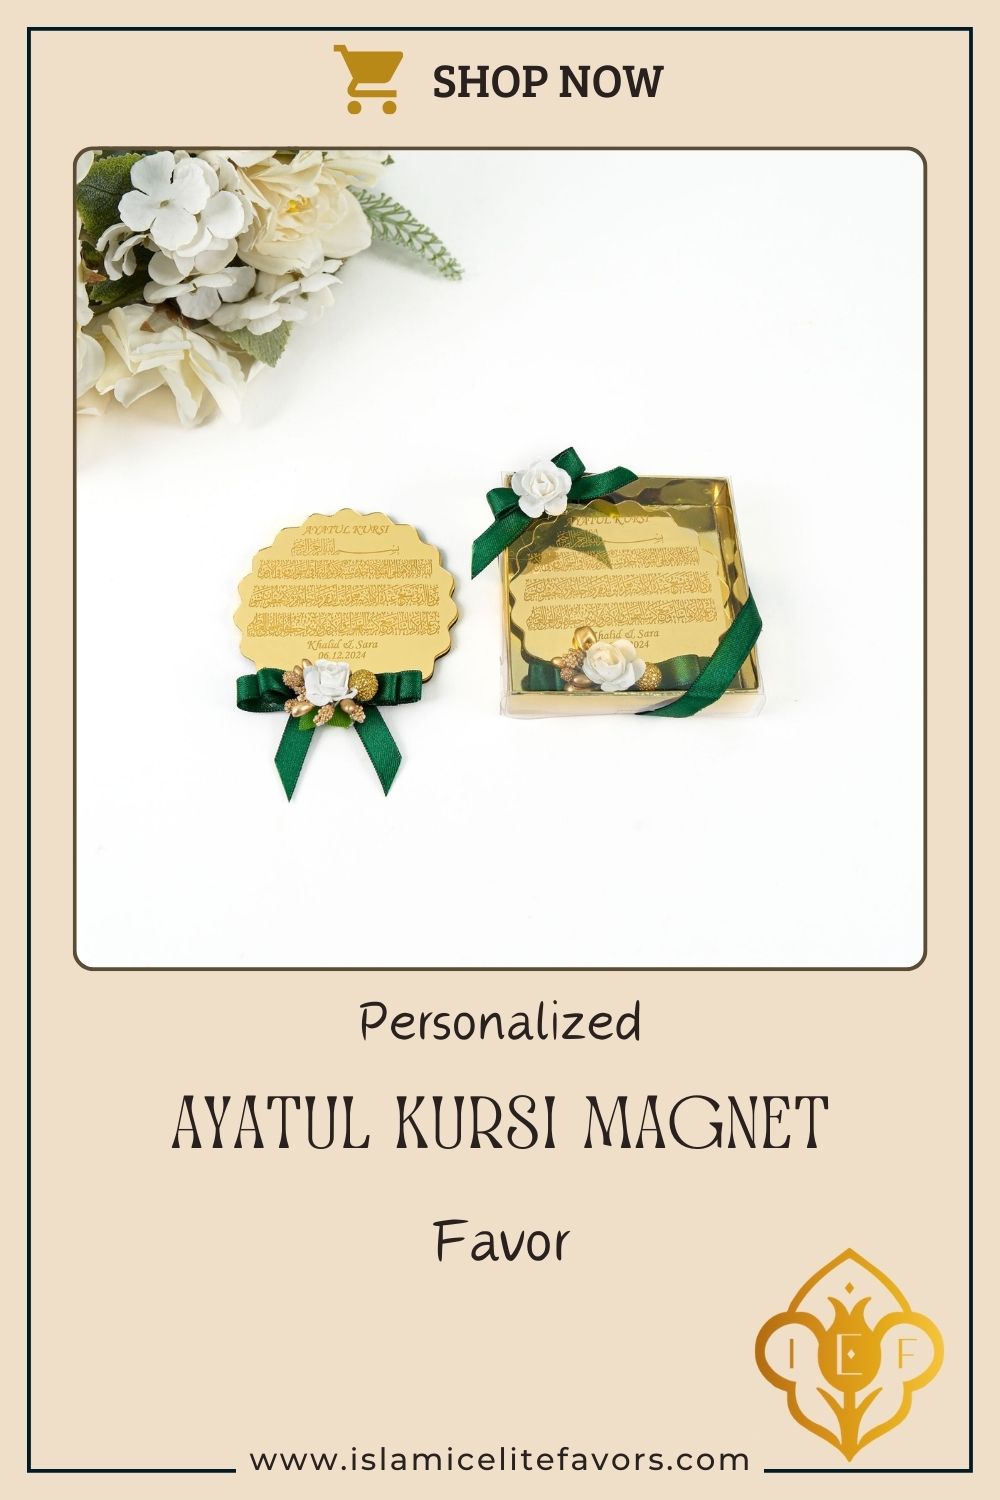 Personalized Ayatul Kursi Magnet Favor with Natural Dried Flower. Explore an exquisite collection of customized Islamic handmade gifts suitable for various occasions, including Weddings, Nikkah ceremonies, Engagements, Baby Showers, Bridal Showers, Birthdays, Ameen celebrations, Islamic parties, Ramadan, Eid, Hajj, Umrah, Mother’s Day, Father’s Day, Valentine’s Day, Anniversaries, and Graduations. Each gift is thoughtfully crafted to reflect the essence of these special moments.